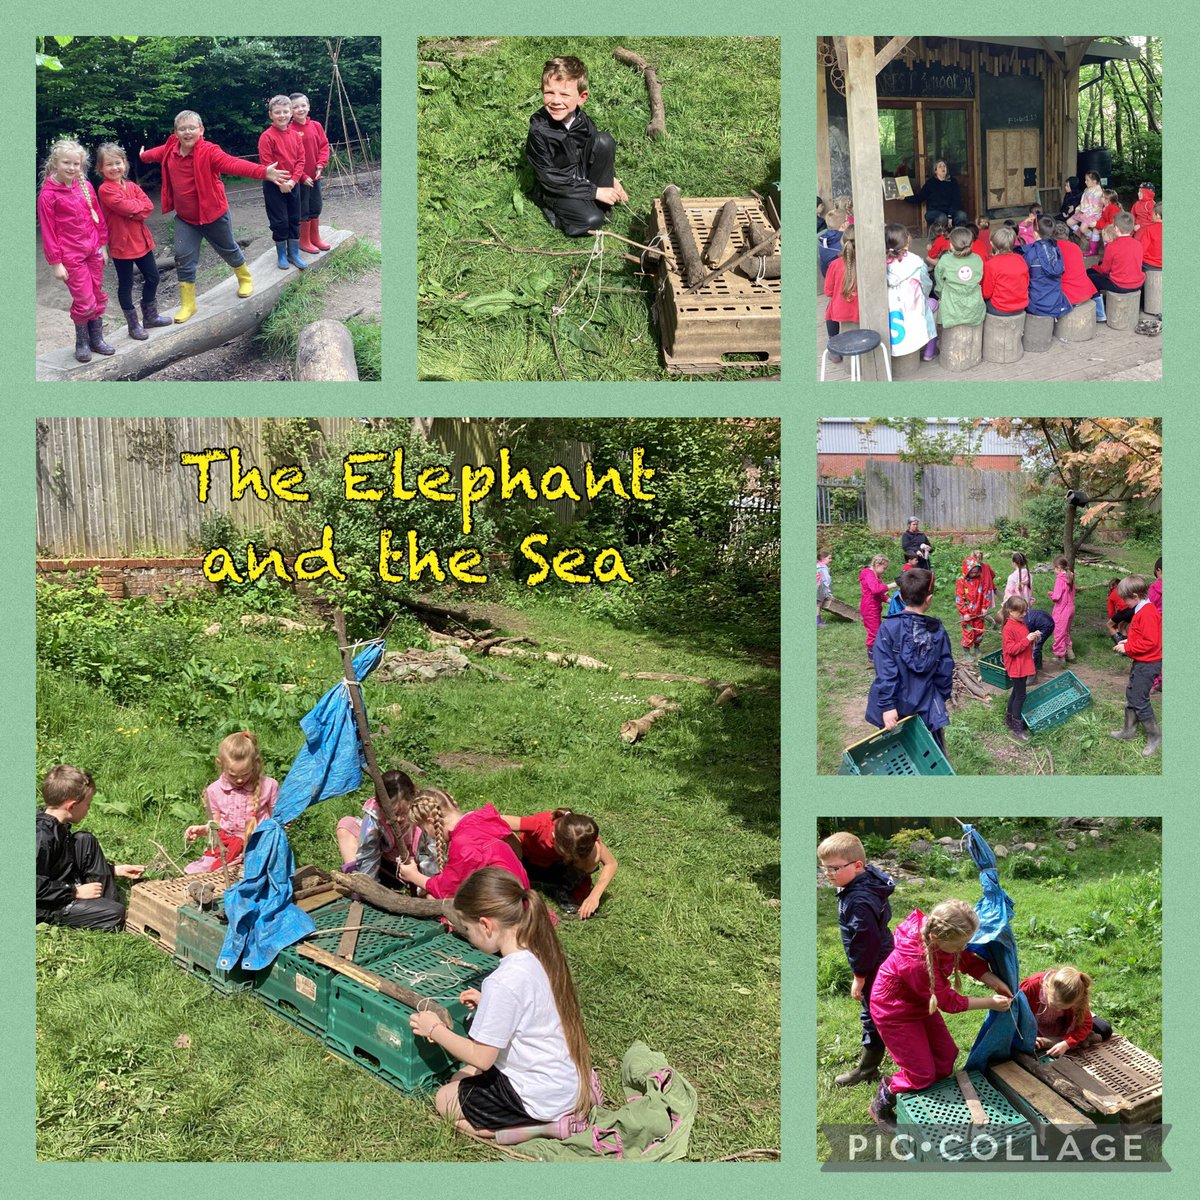 A lovely afternoon in Forest School for Year 2 today. It was glorious! #DiddyWellbeing #DiddyForestSchool #collaboration #AreYouReallyReading